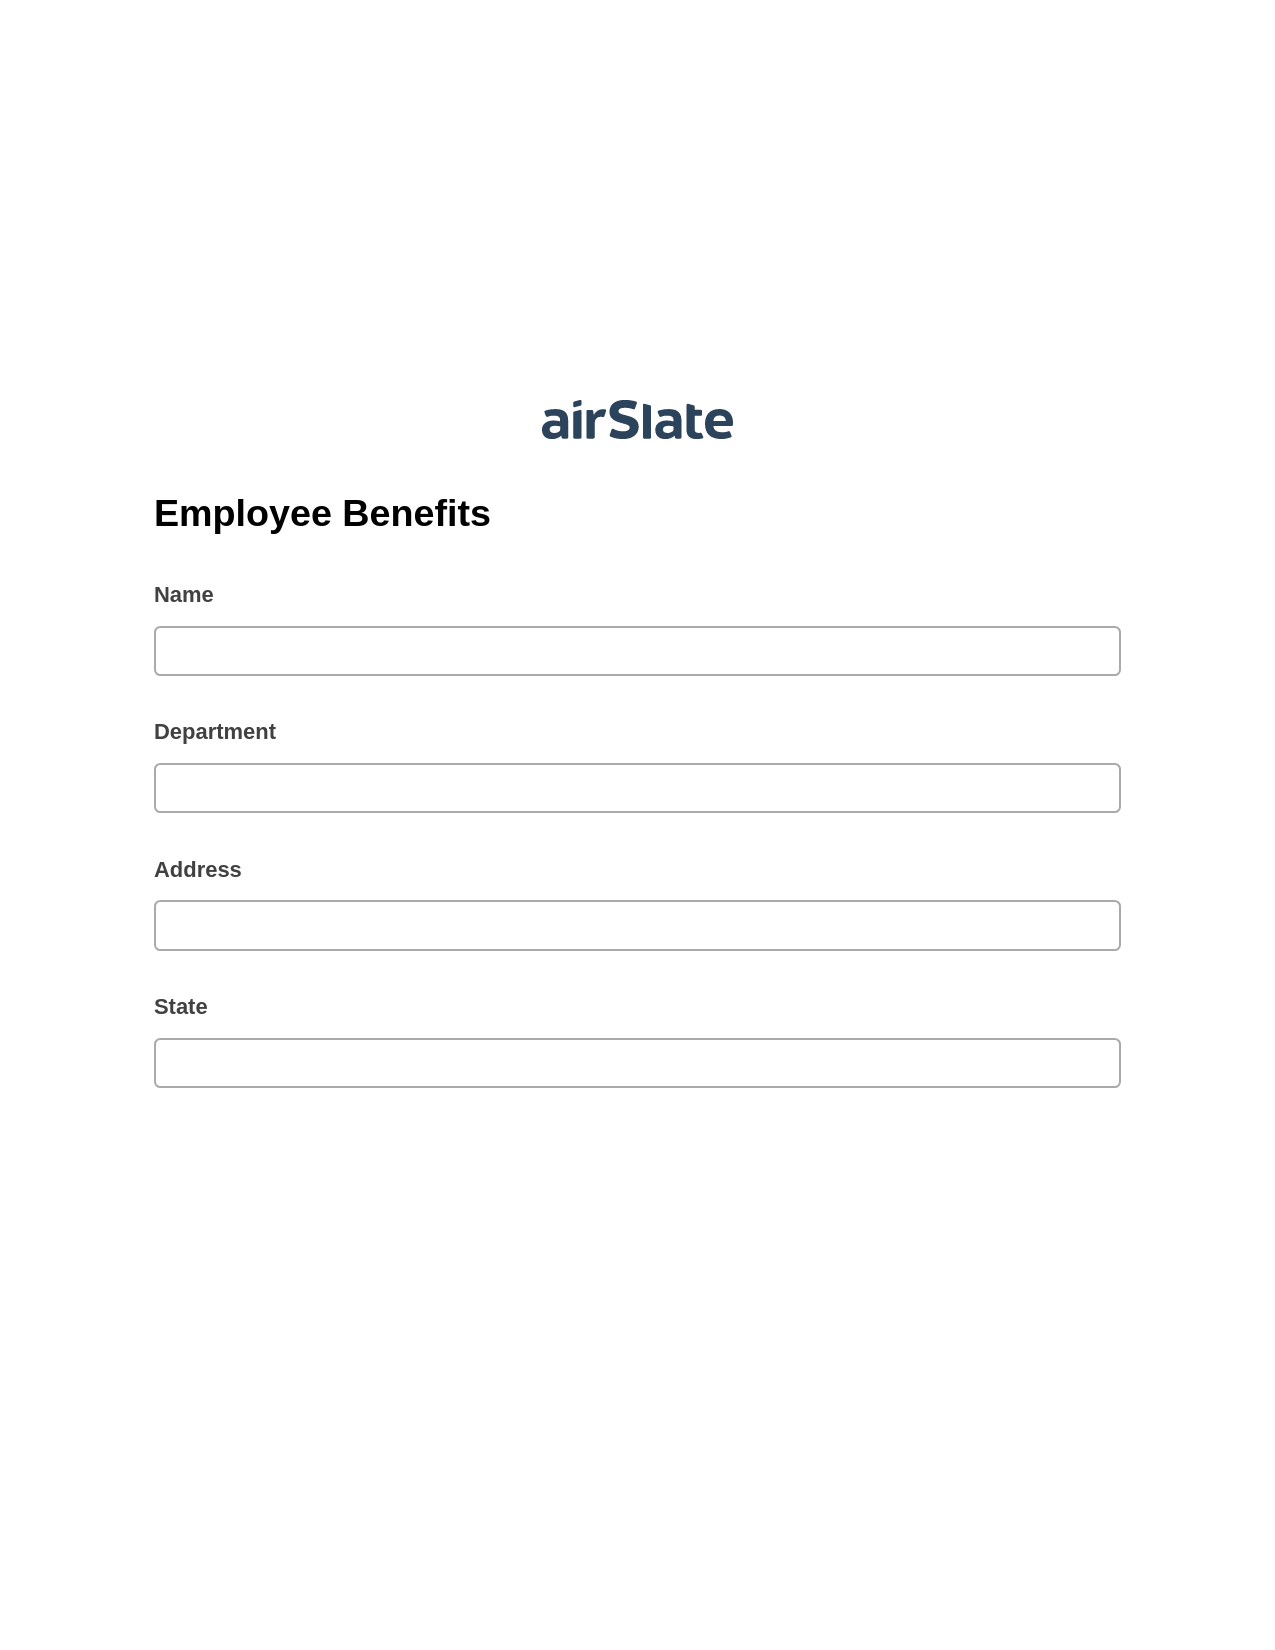 Multirole Employee Benefits Pre-fill from Salesforce Record Bot, Create slate from another Flow Bot, Post-finish Document Bot